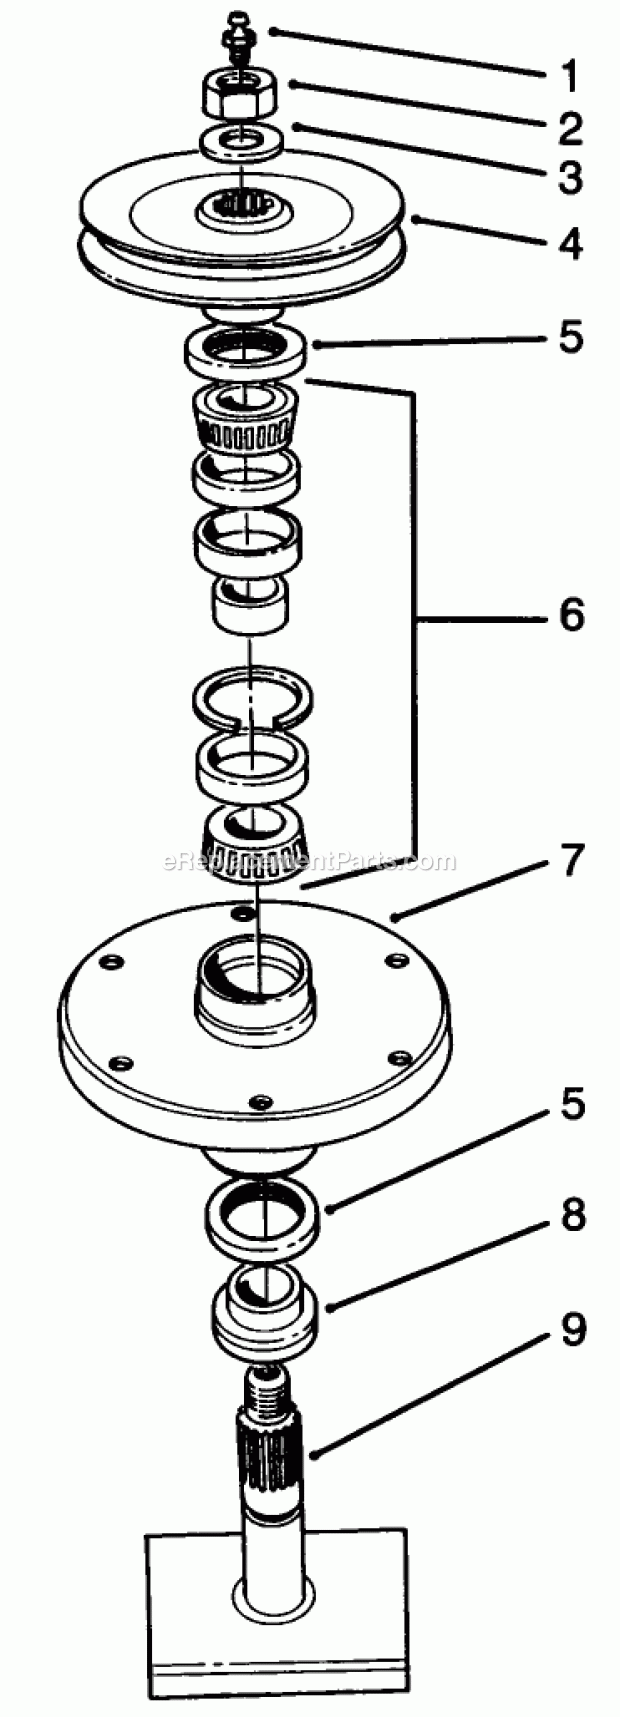 Toro 30136 (4901037-4999999) (1994) 36-in. Side Discharge Mower Drive Spindle No. 27-0870 Diagram